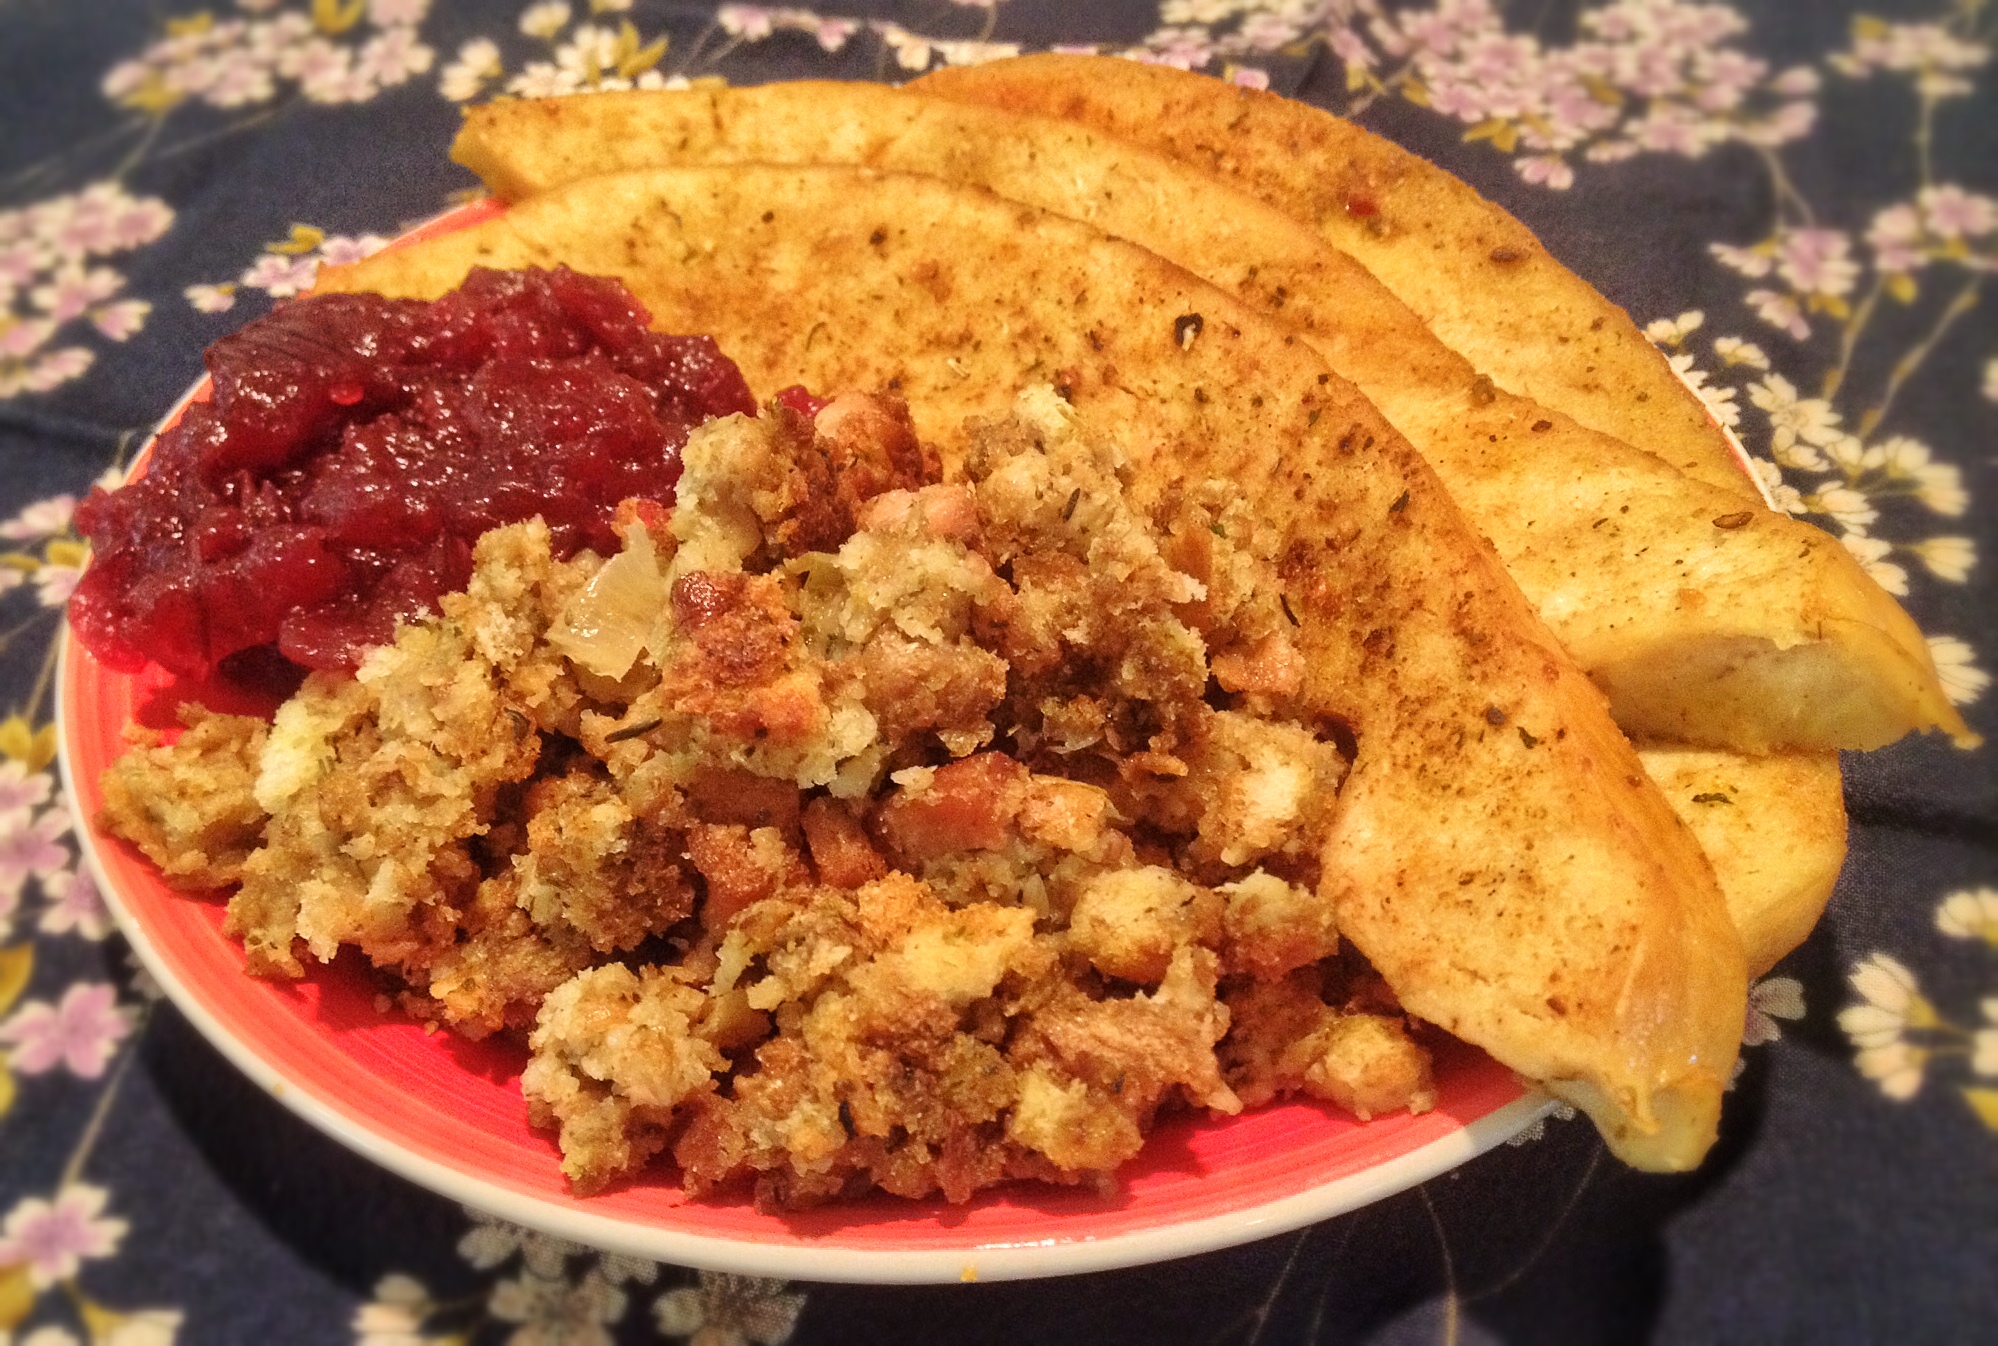 Vegan Turk'y with Stuffing and Cranberry Sauce